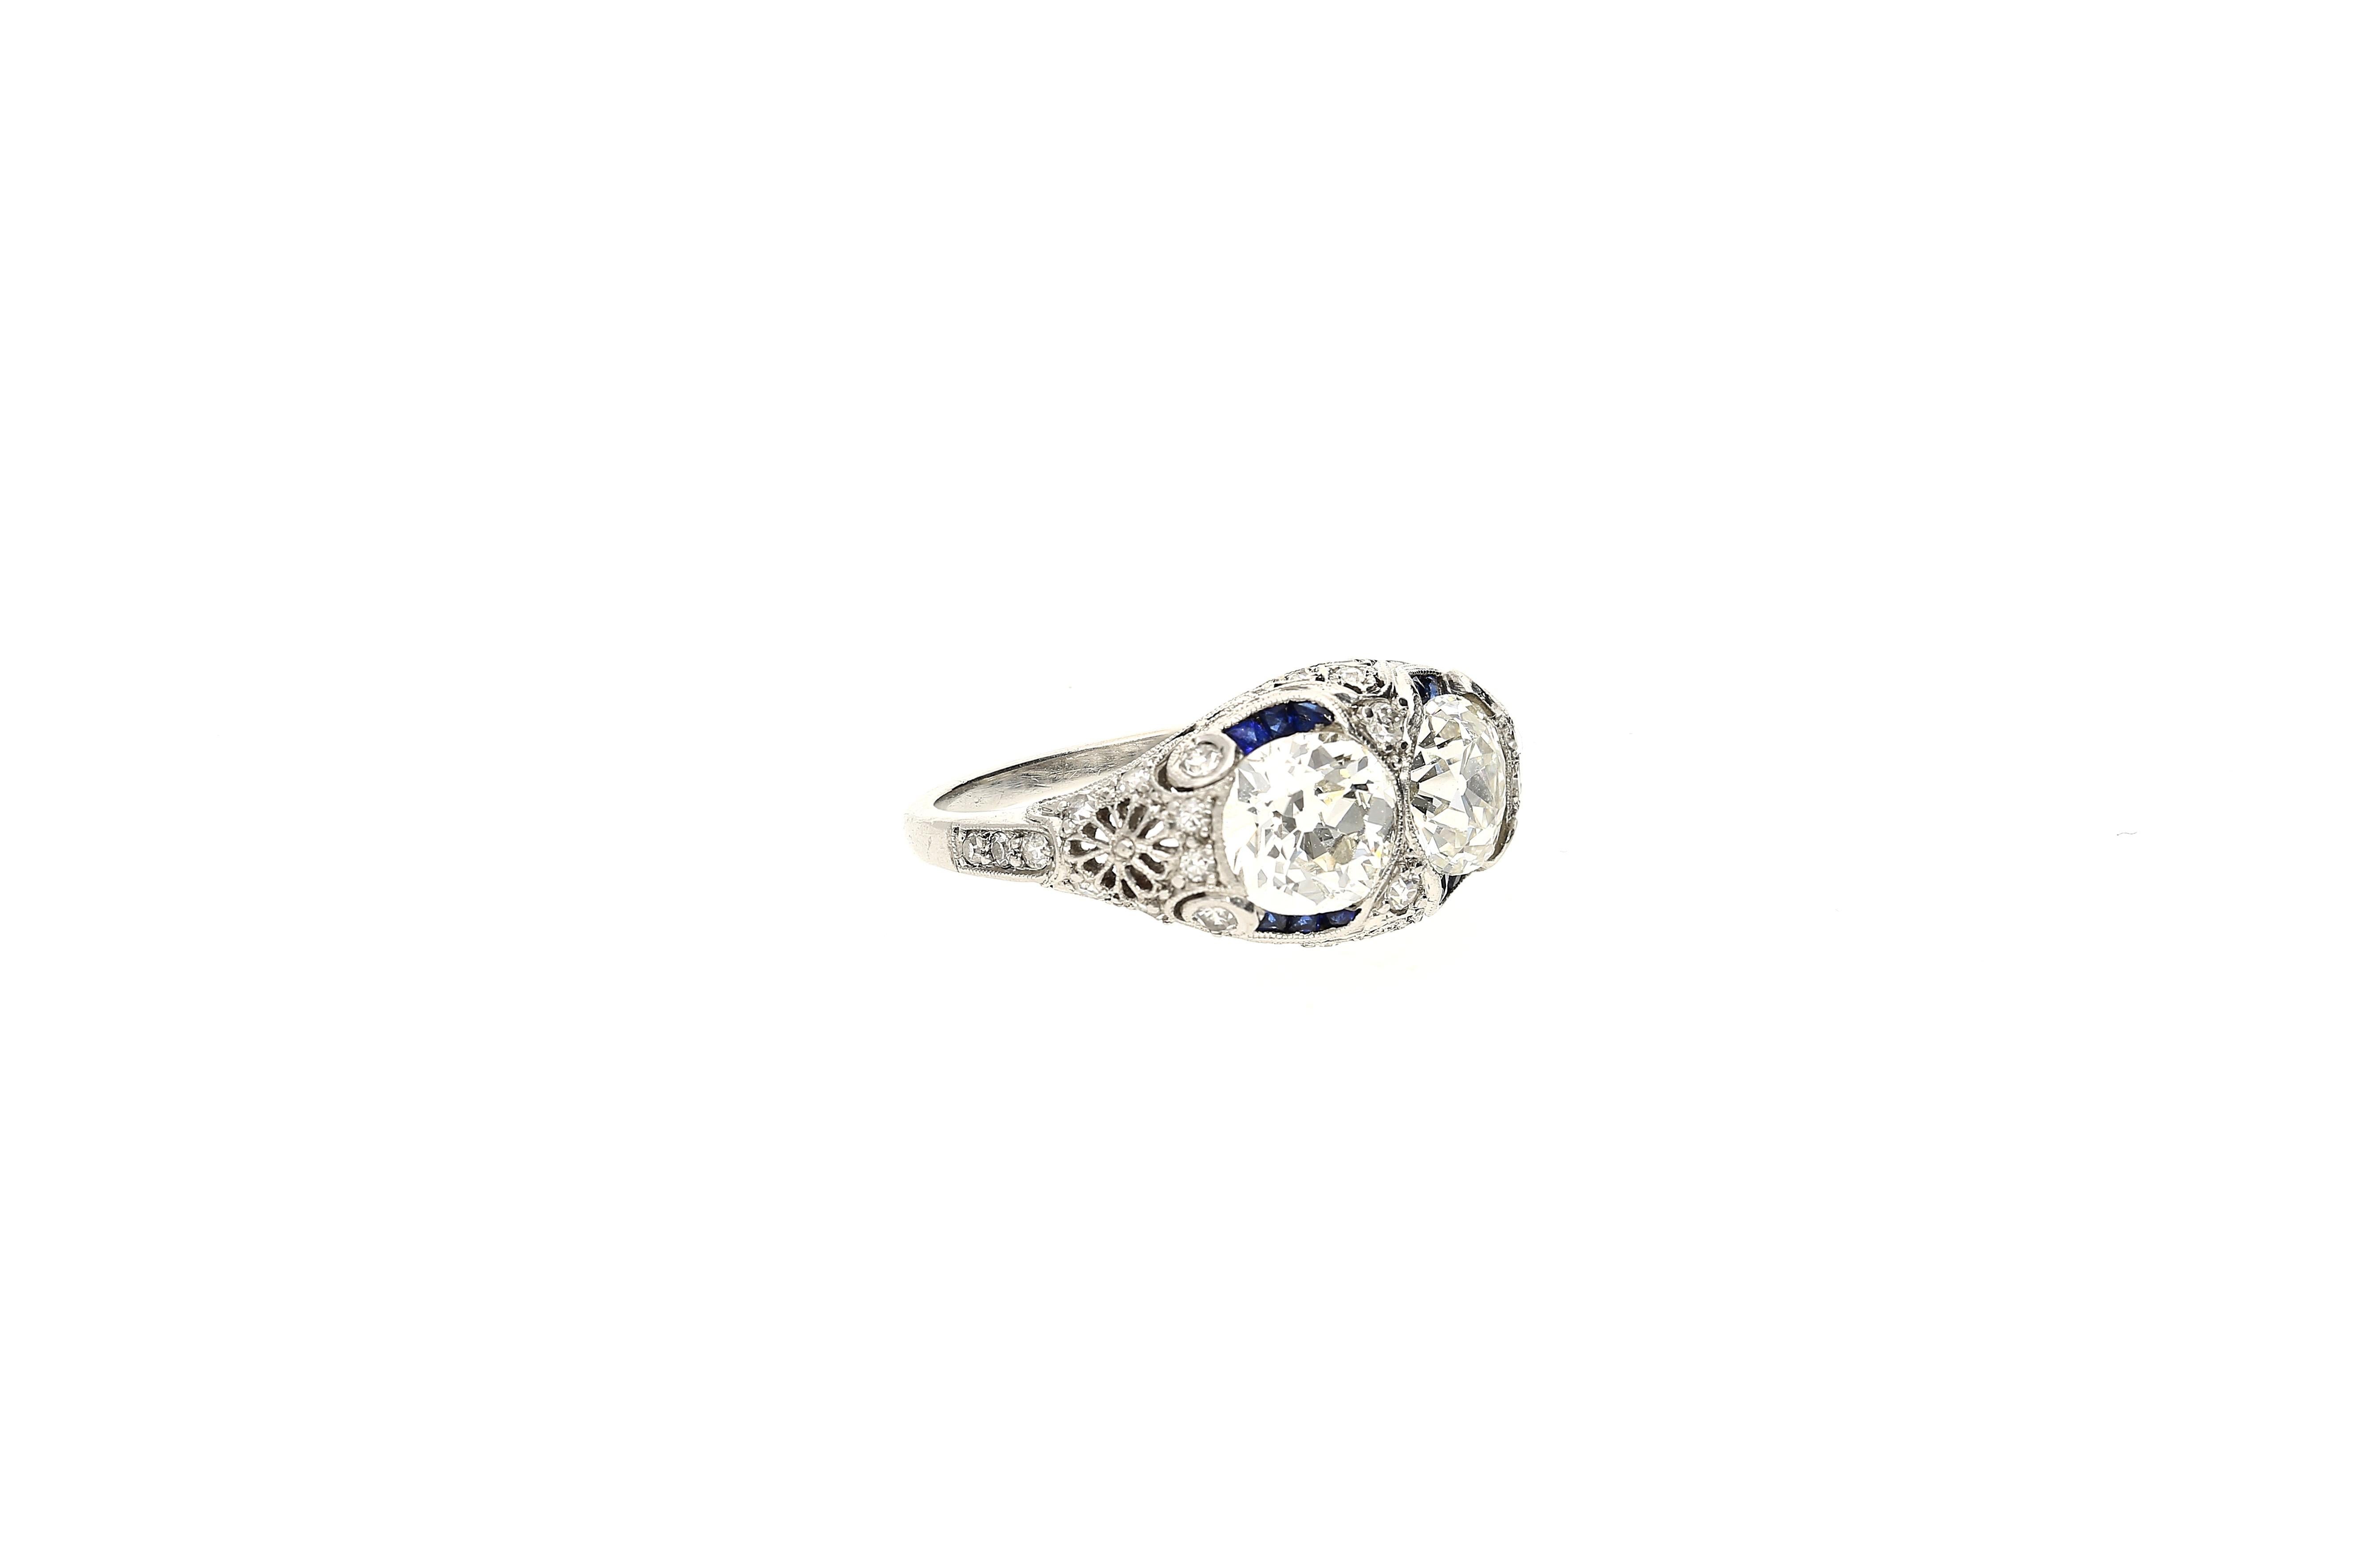 Original 1930's Art Deco vintage double diamond ring with additional diamond and sapphire adornments. This ring is almost 100 years old and in mint condition. An incredible feat considering the ring's antiquity. 

2 perfectly matched diamond center